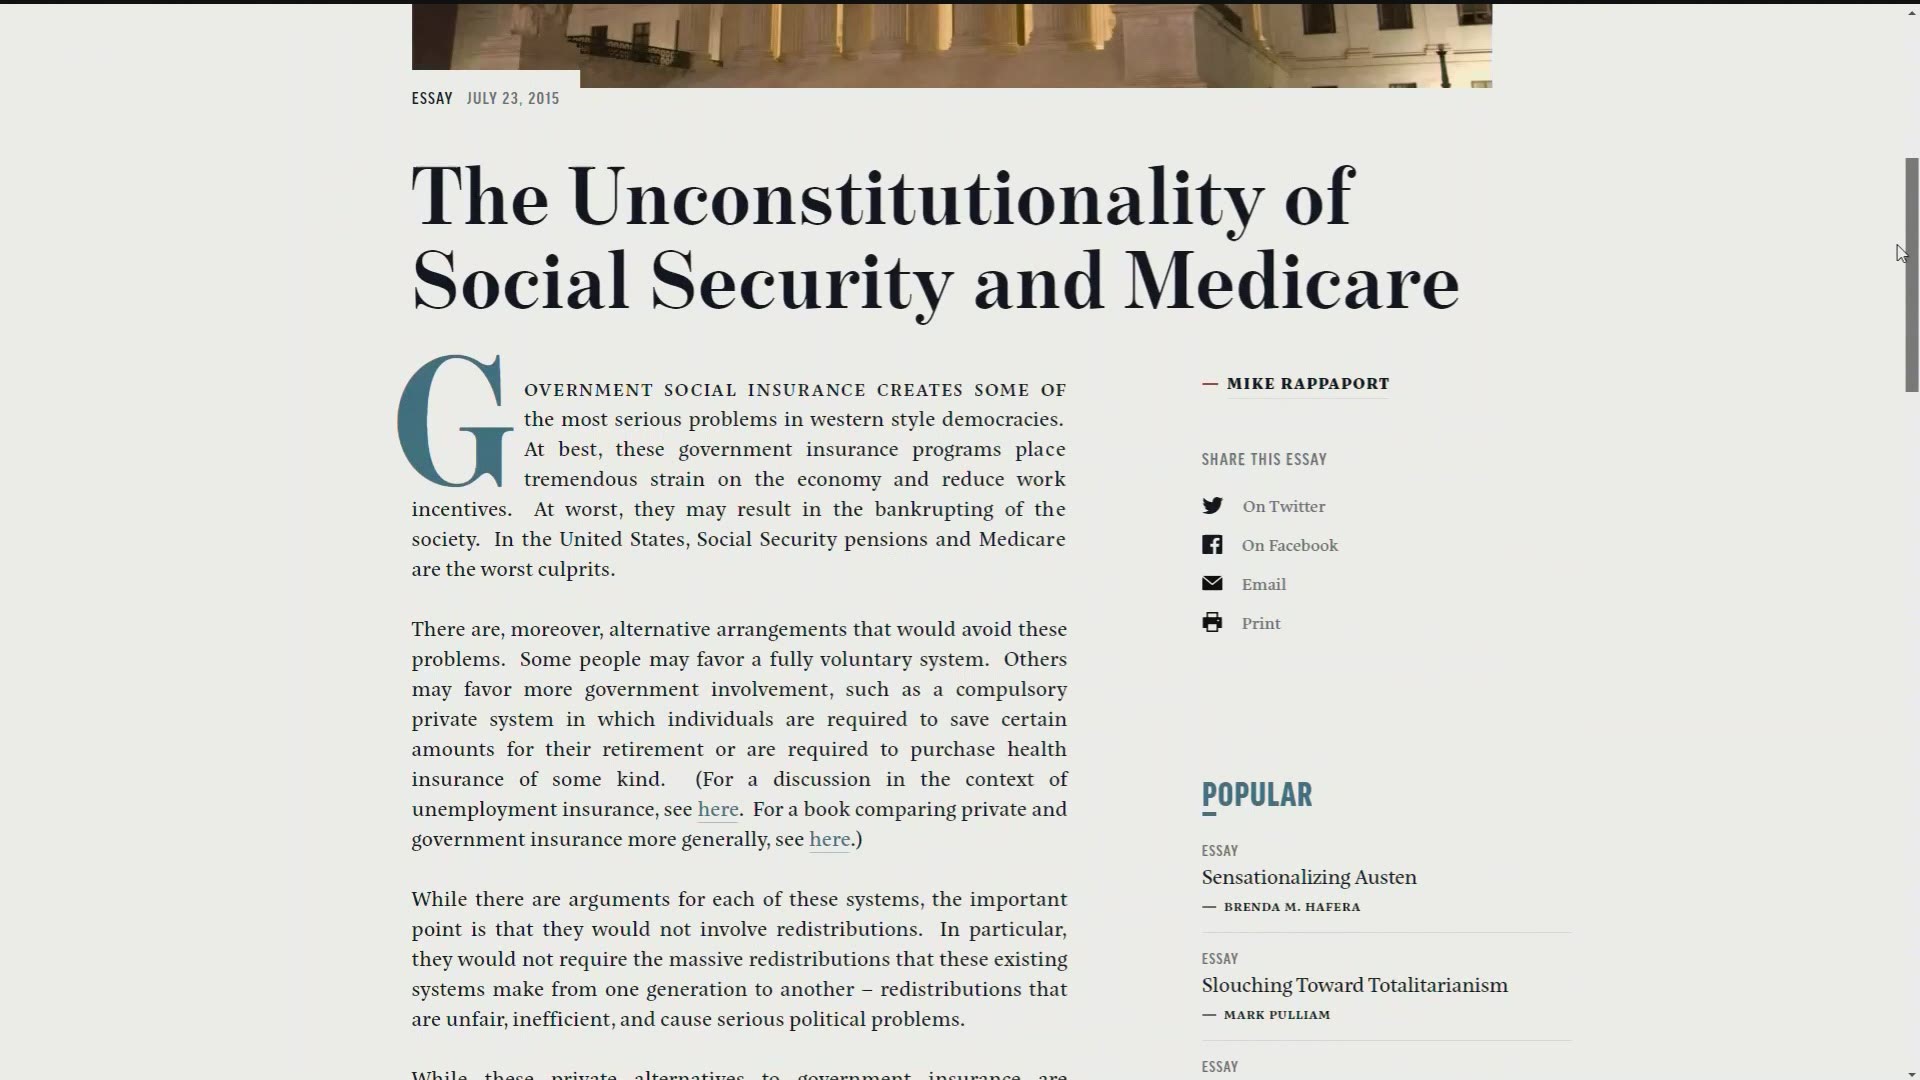 The professor's 2015 article argued Social Security and Medicare are unconstitutional.